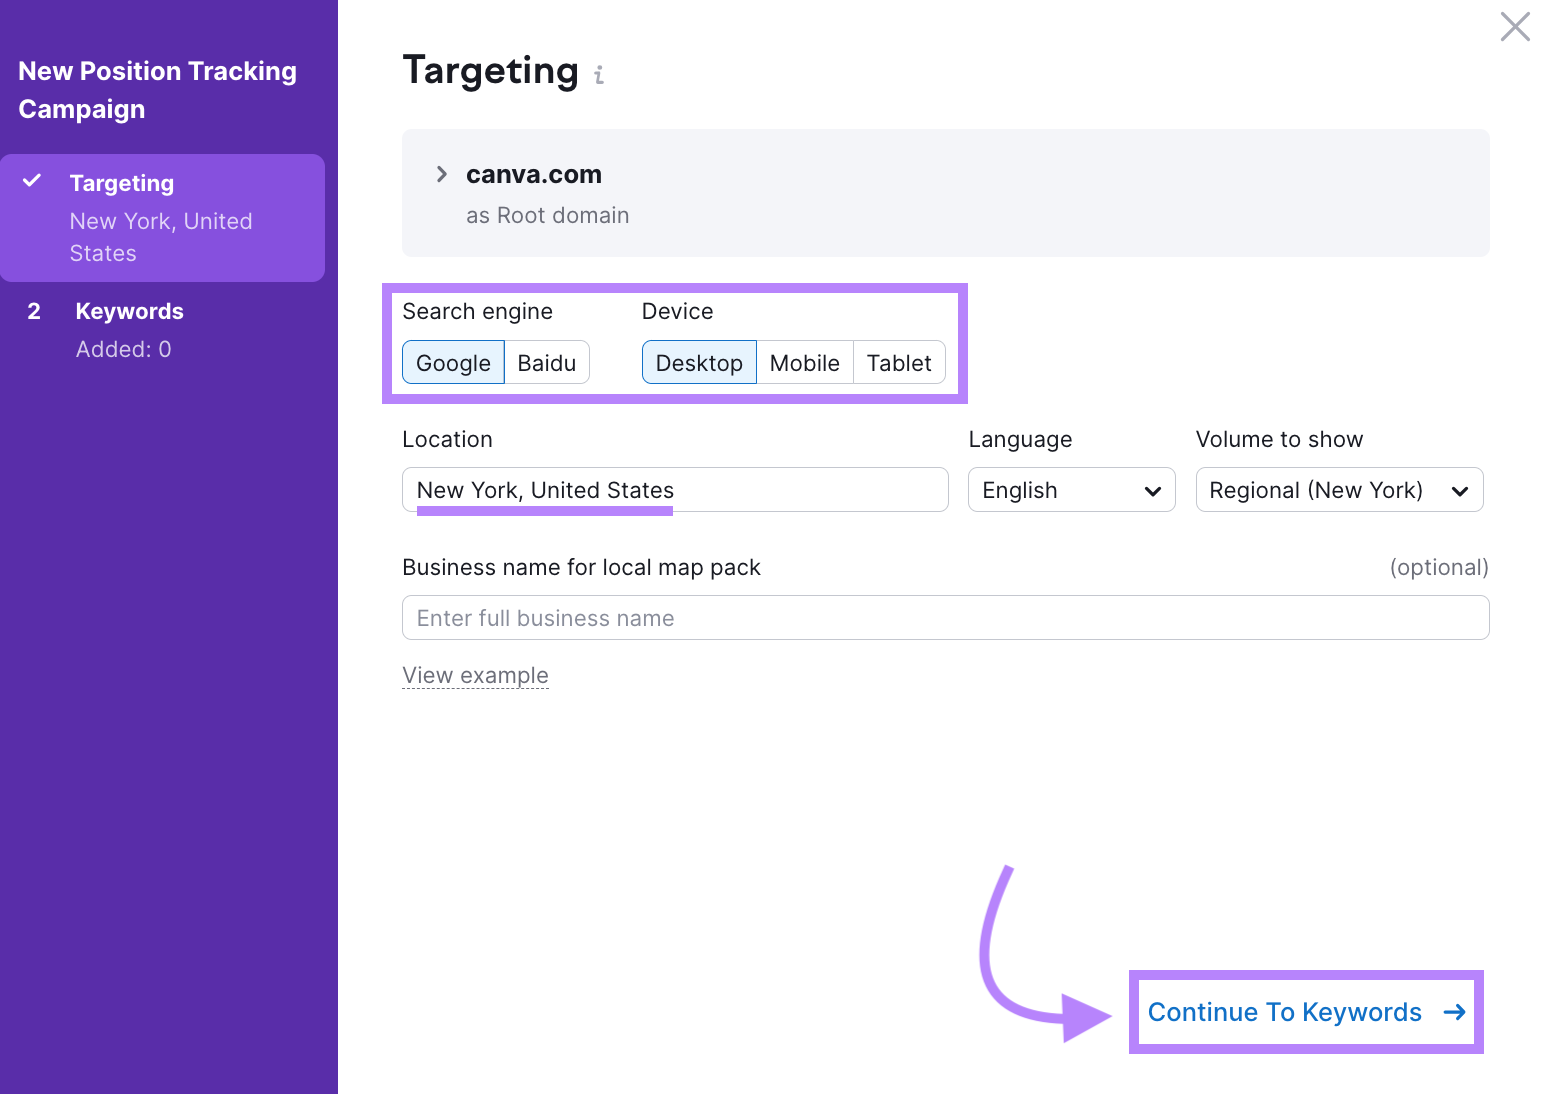 "Targeting" page in Position Tracking tool